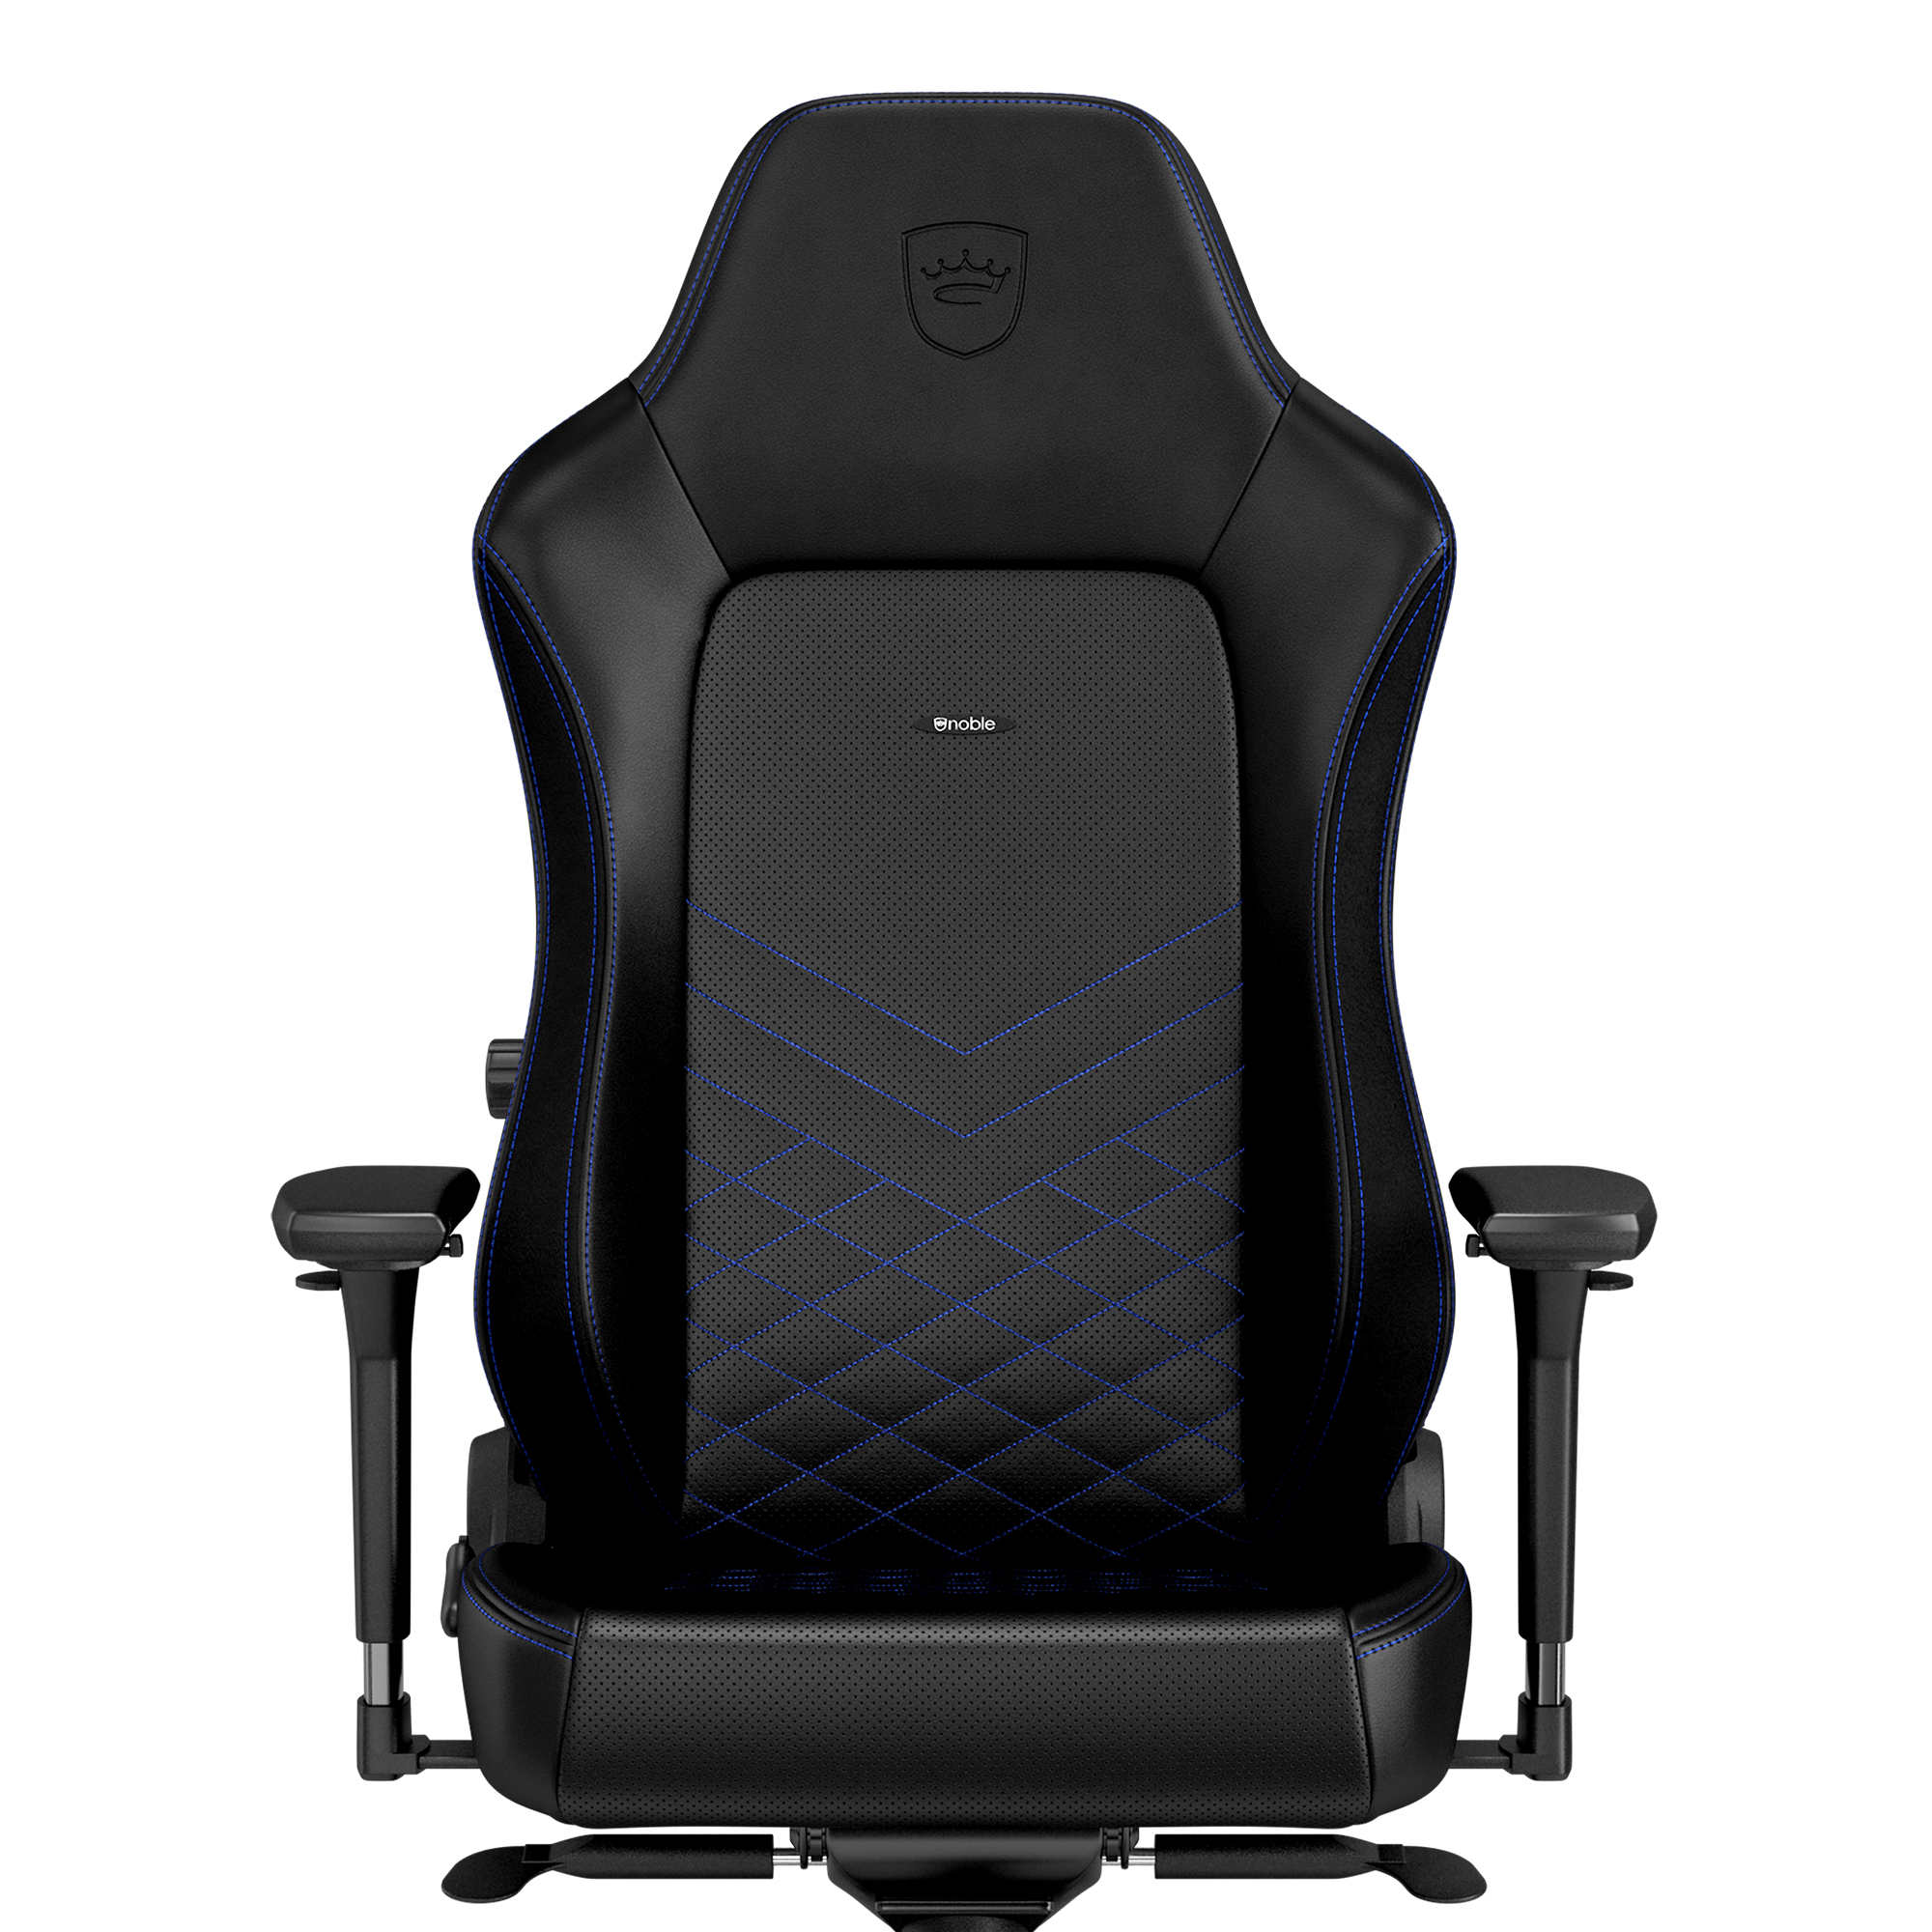 noblechairs - noblechairs HERO Gaming Chair - Black/Blue